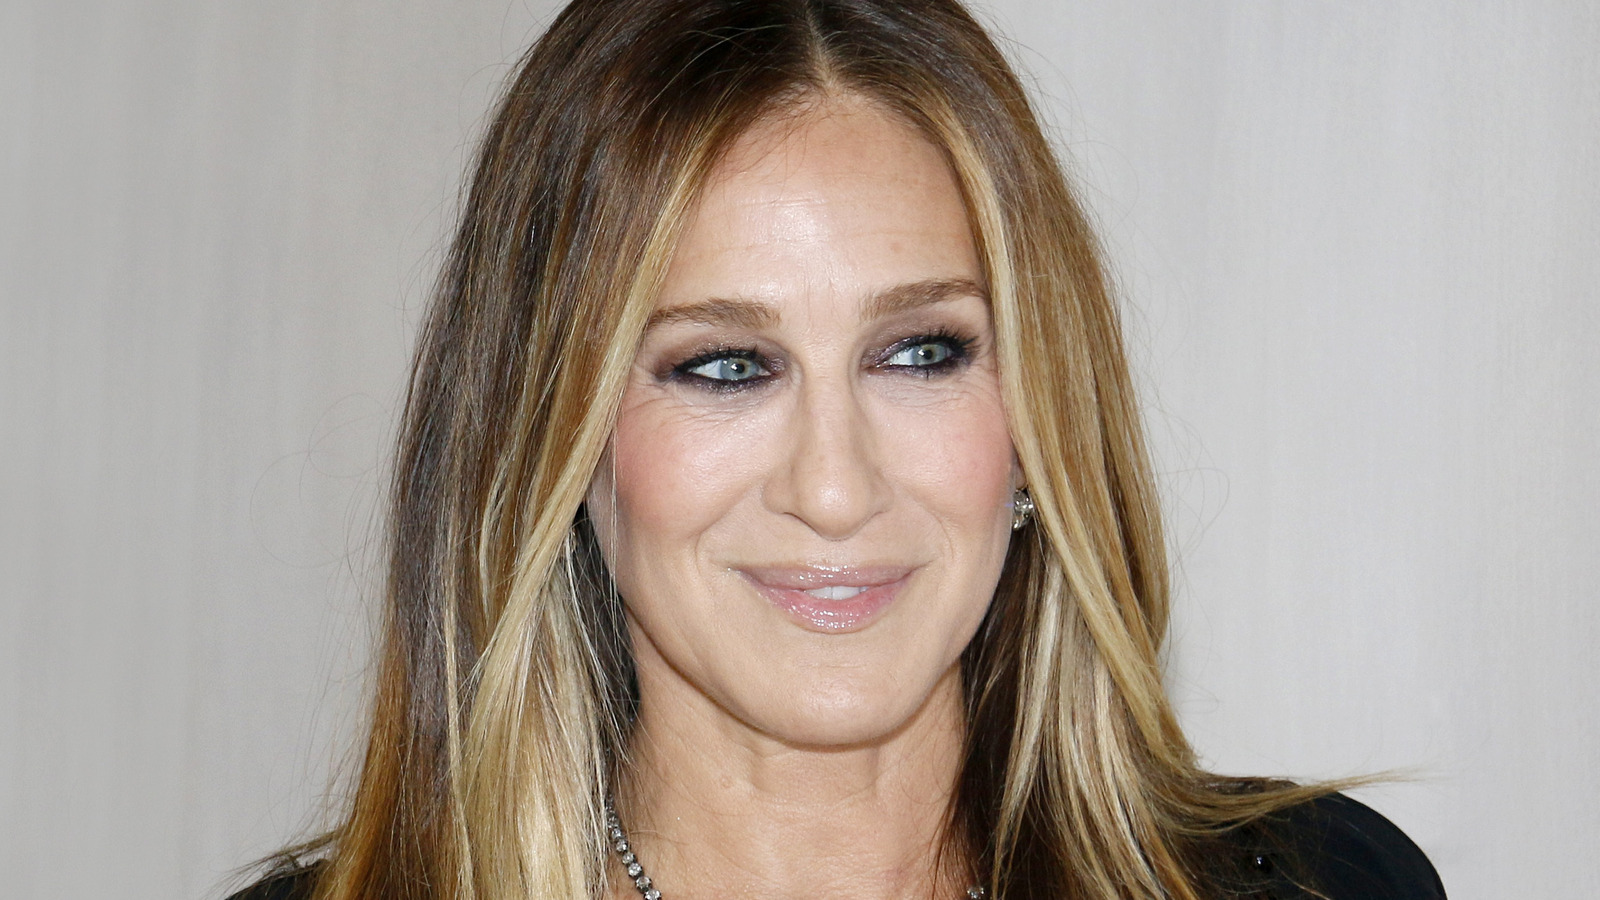 https://www.looper.com/img/gallery/sarah-jessica-parker-teases-the-likelihood-of-and-just-like-that-season-2/l-intro-1643762185.jpg